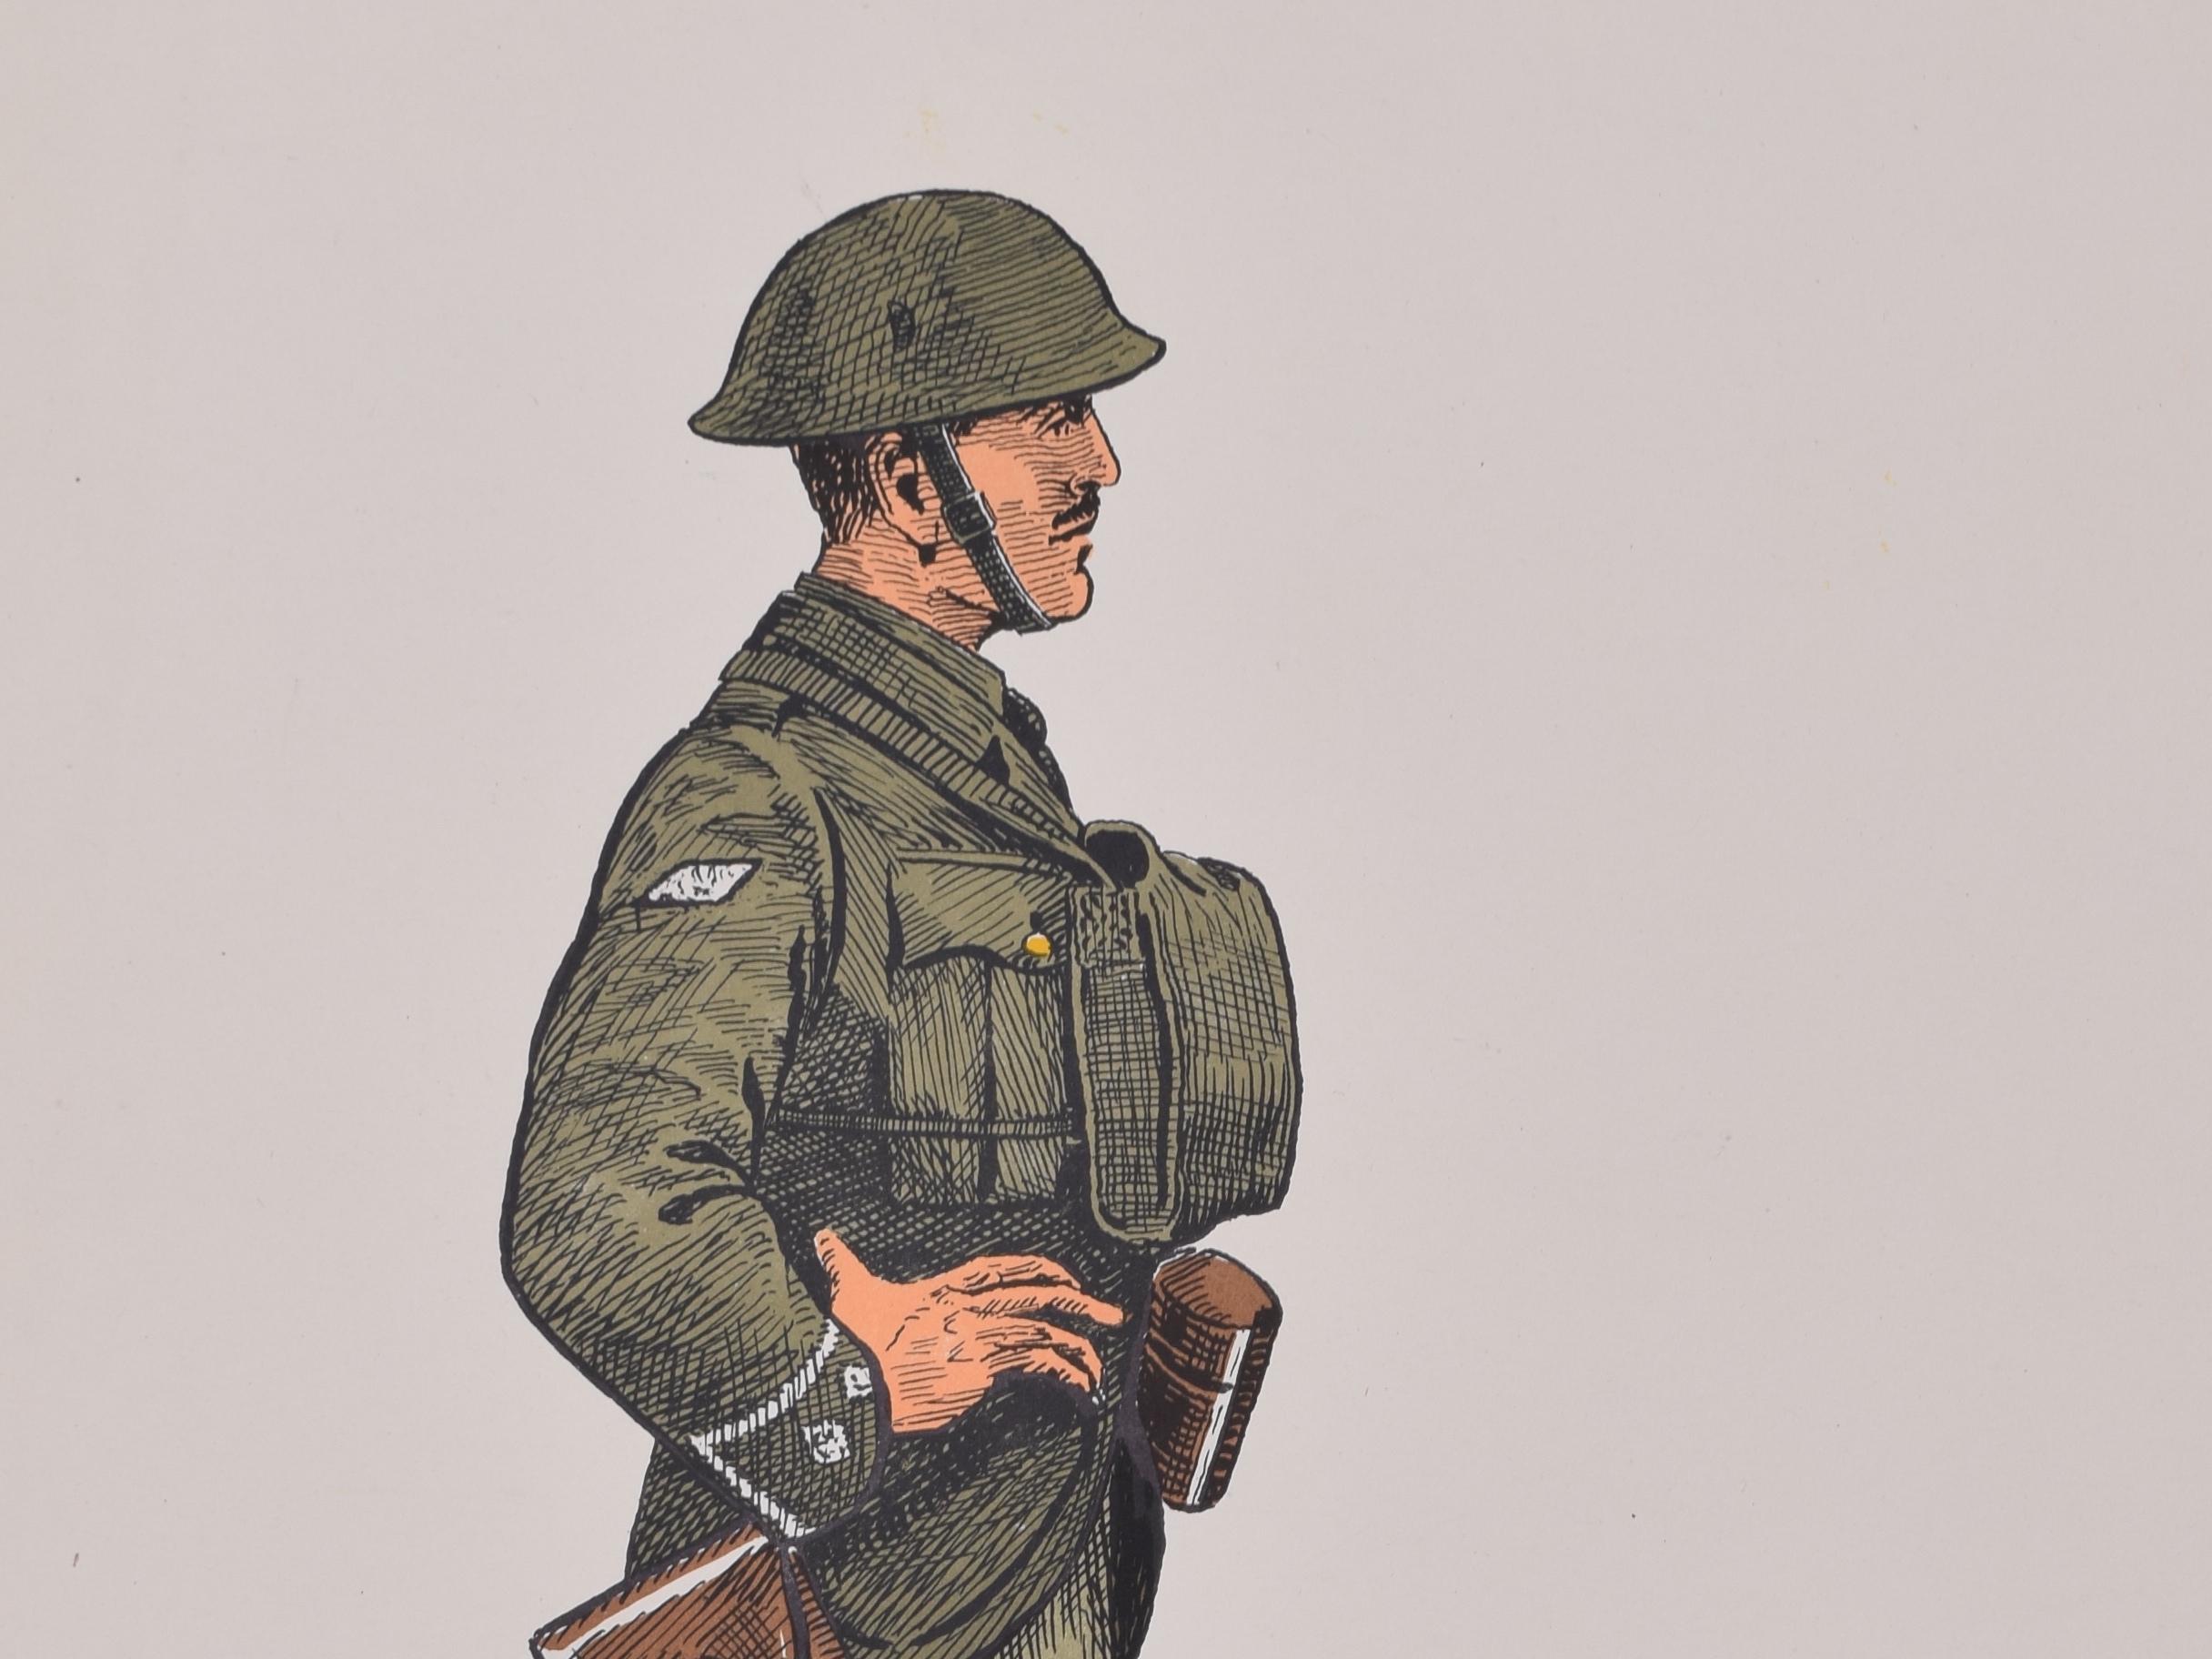 Royal Tank Corps Captain Institute of Army Education WW1 uniform lithograph - Print by Unknown